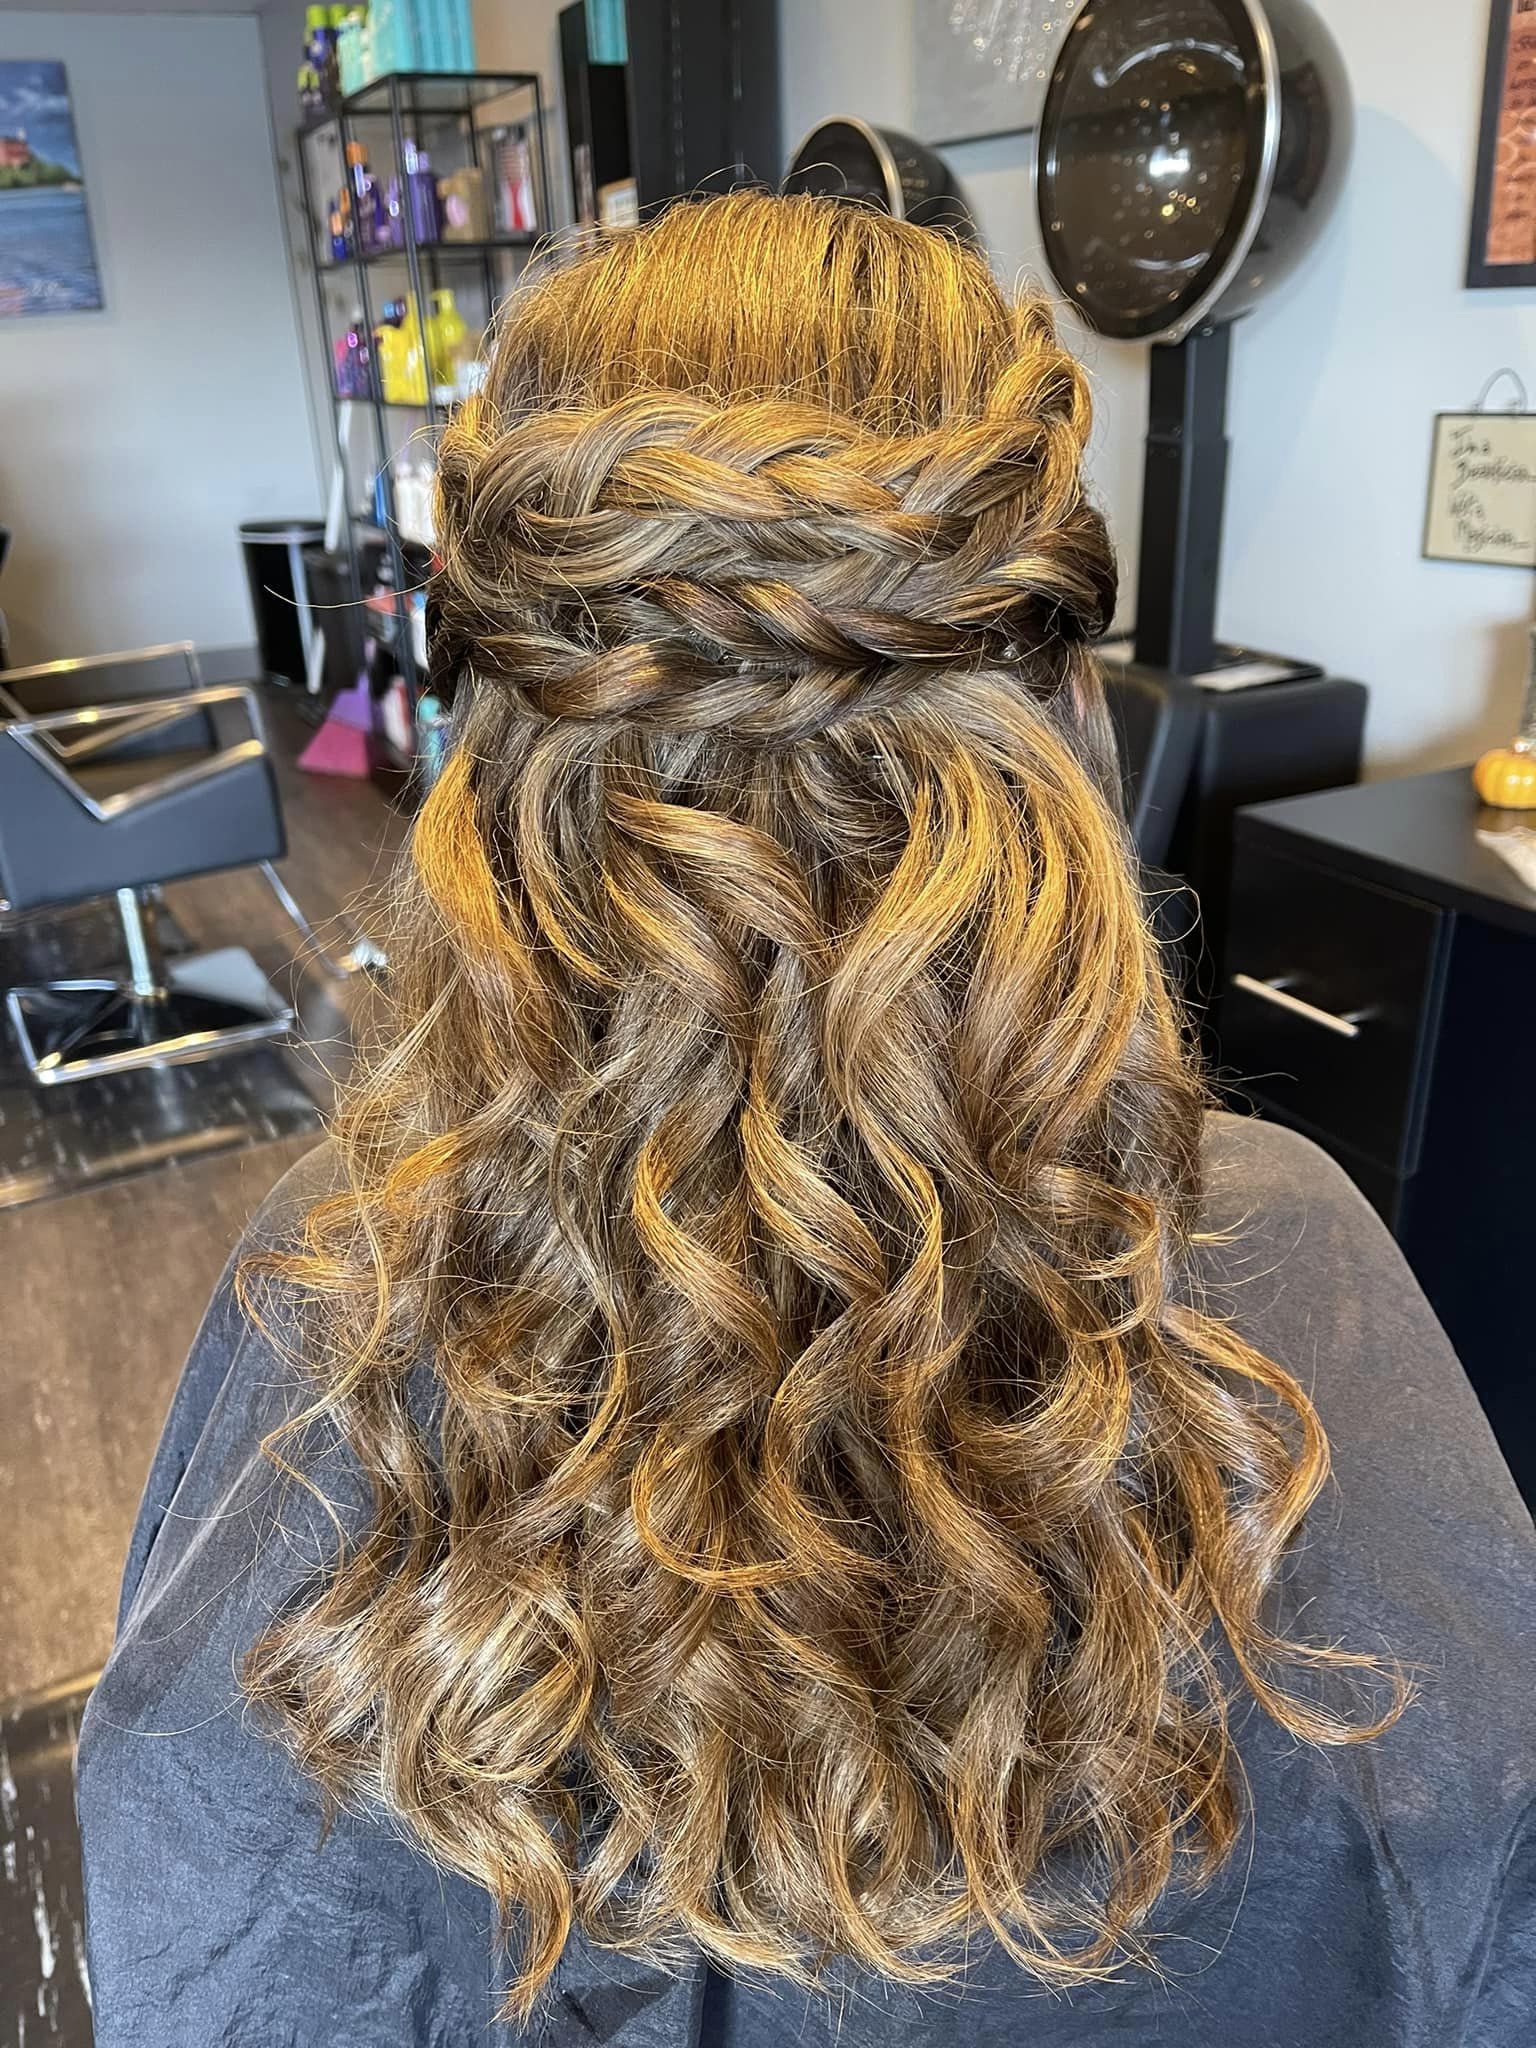 Halo Hair Design 2589 Post Rd, Plover Wisconsin 54467